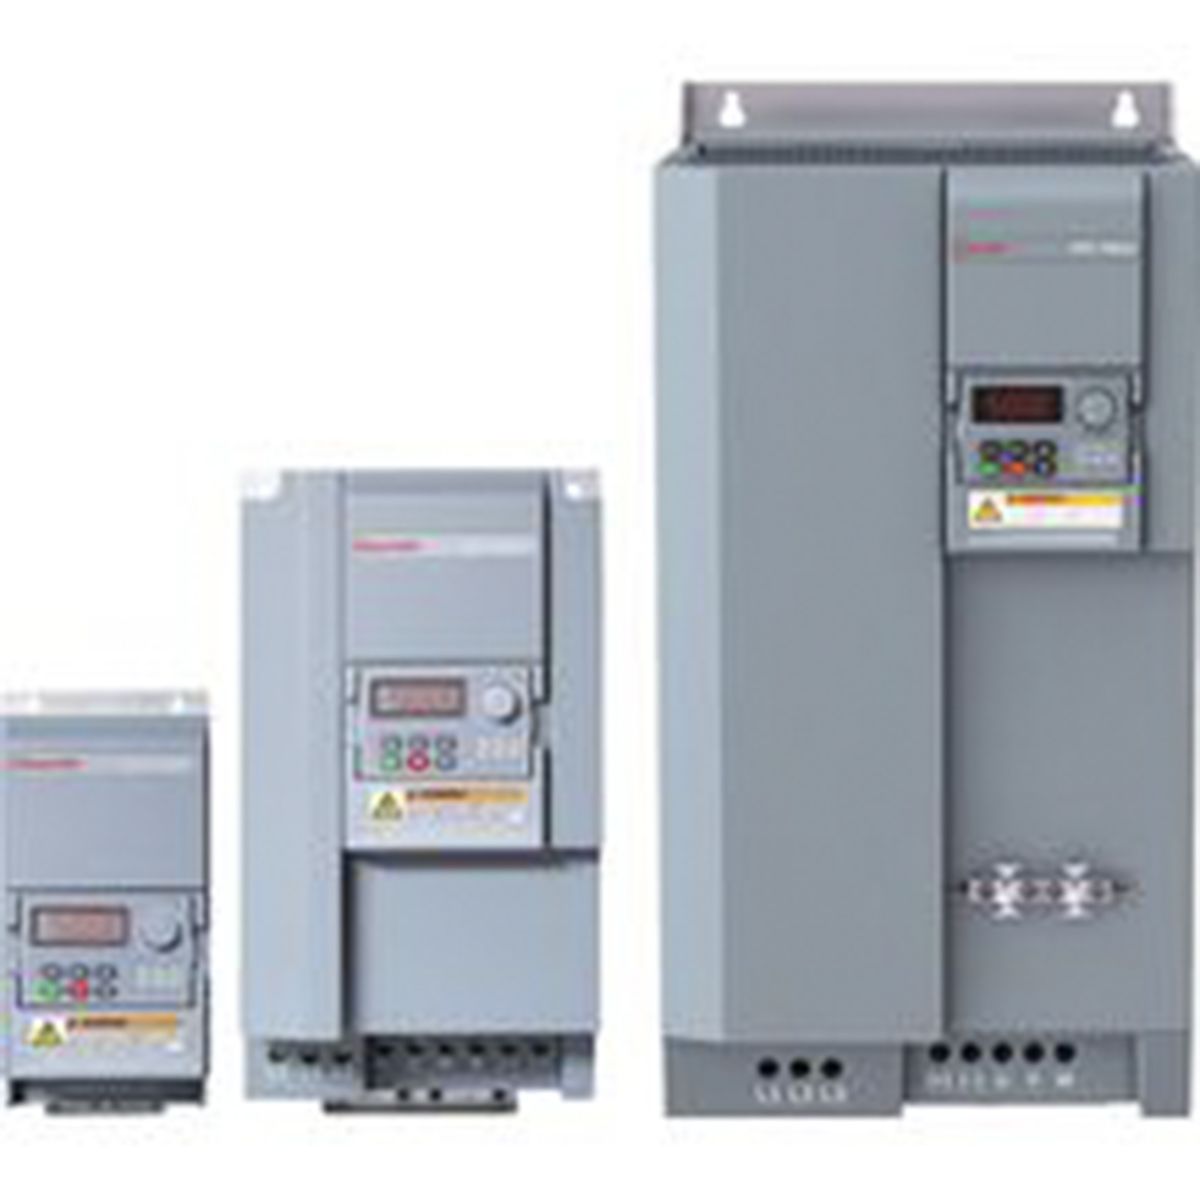 Bosch Rexroth EFC 5610 Inverter Drive, 1-Phase In, 0 → 400Hz Out, 1.5 kW, 230 V ac, 7.3 A